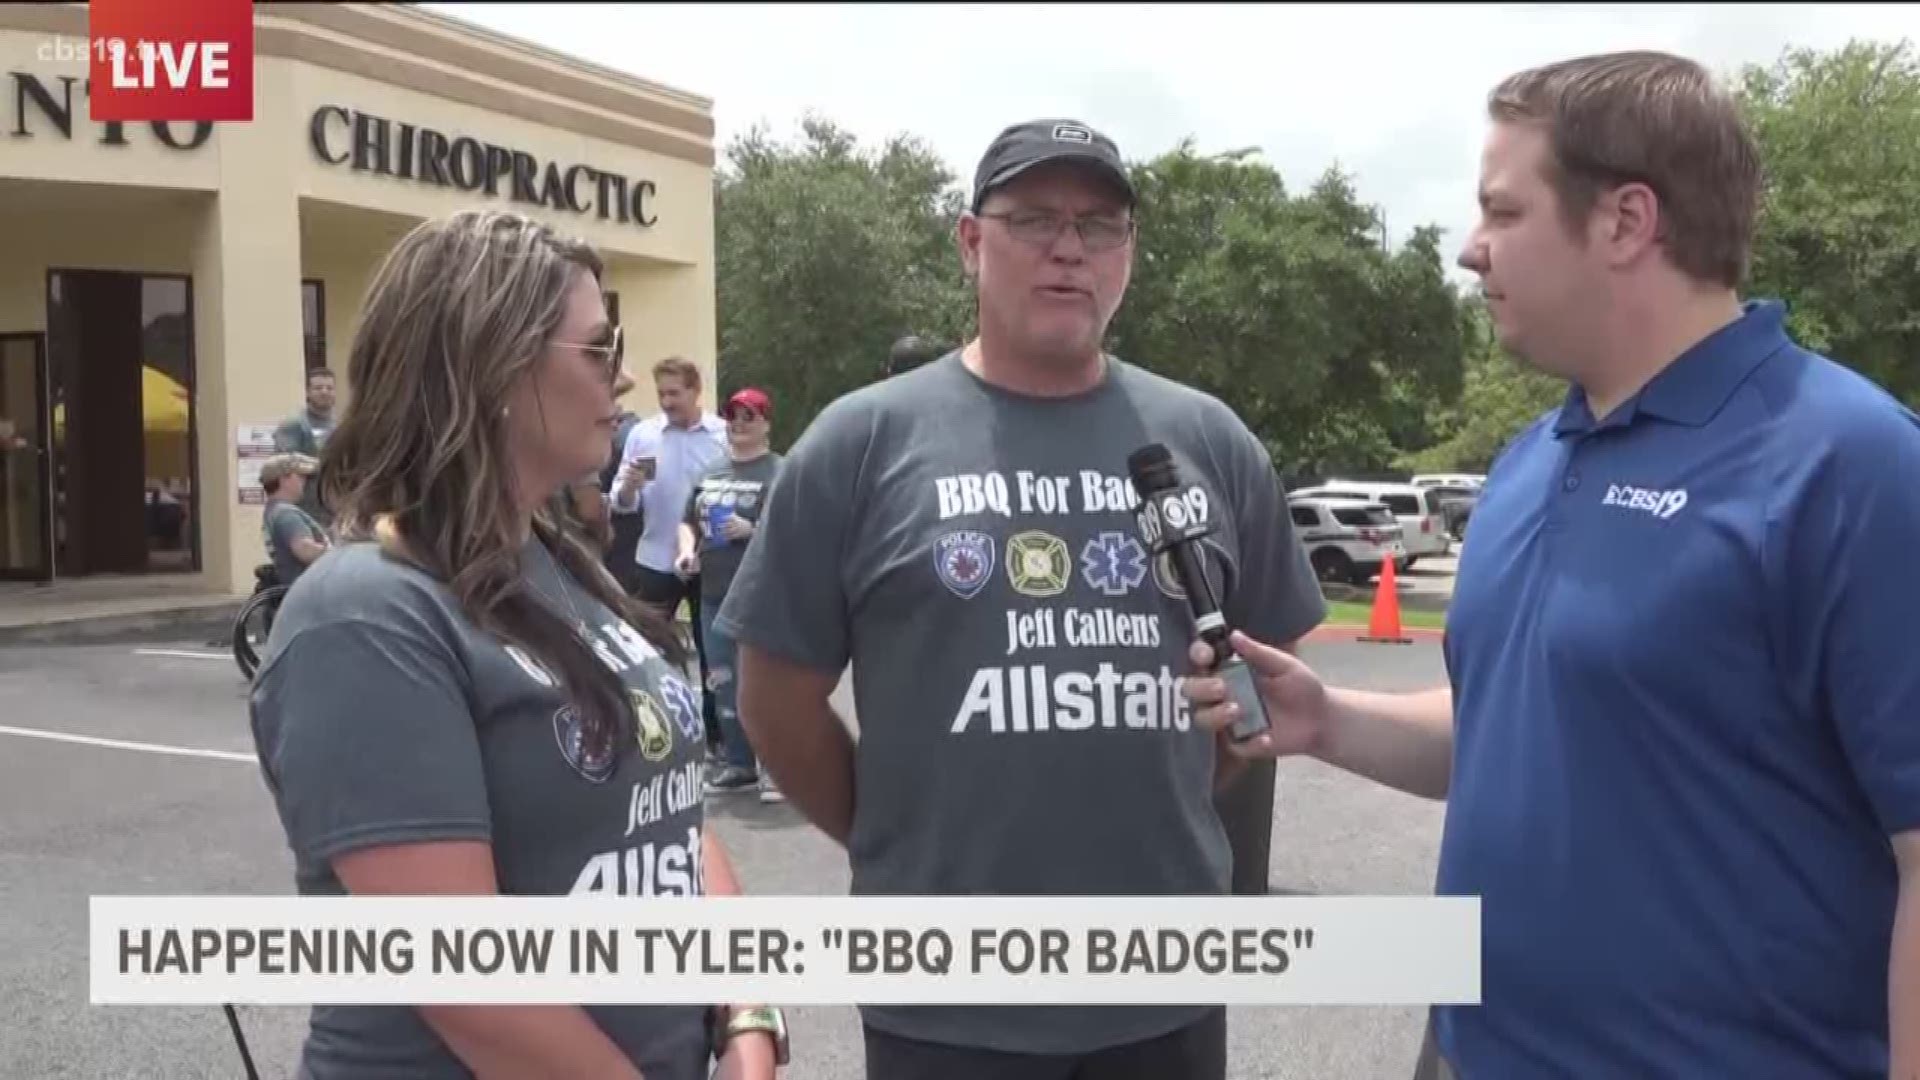 LIVE Interview at the BBQ for Badges event. Meteorologist Michael Behrens reports.